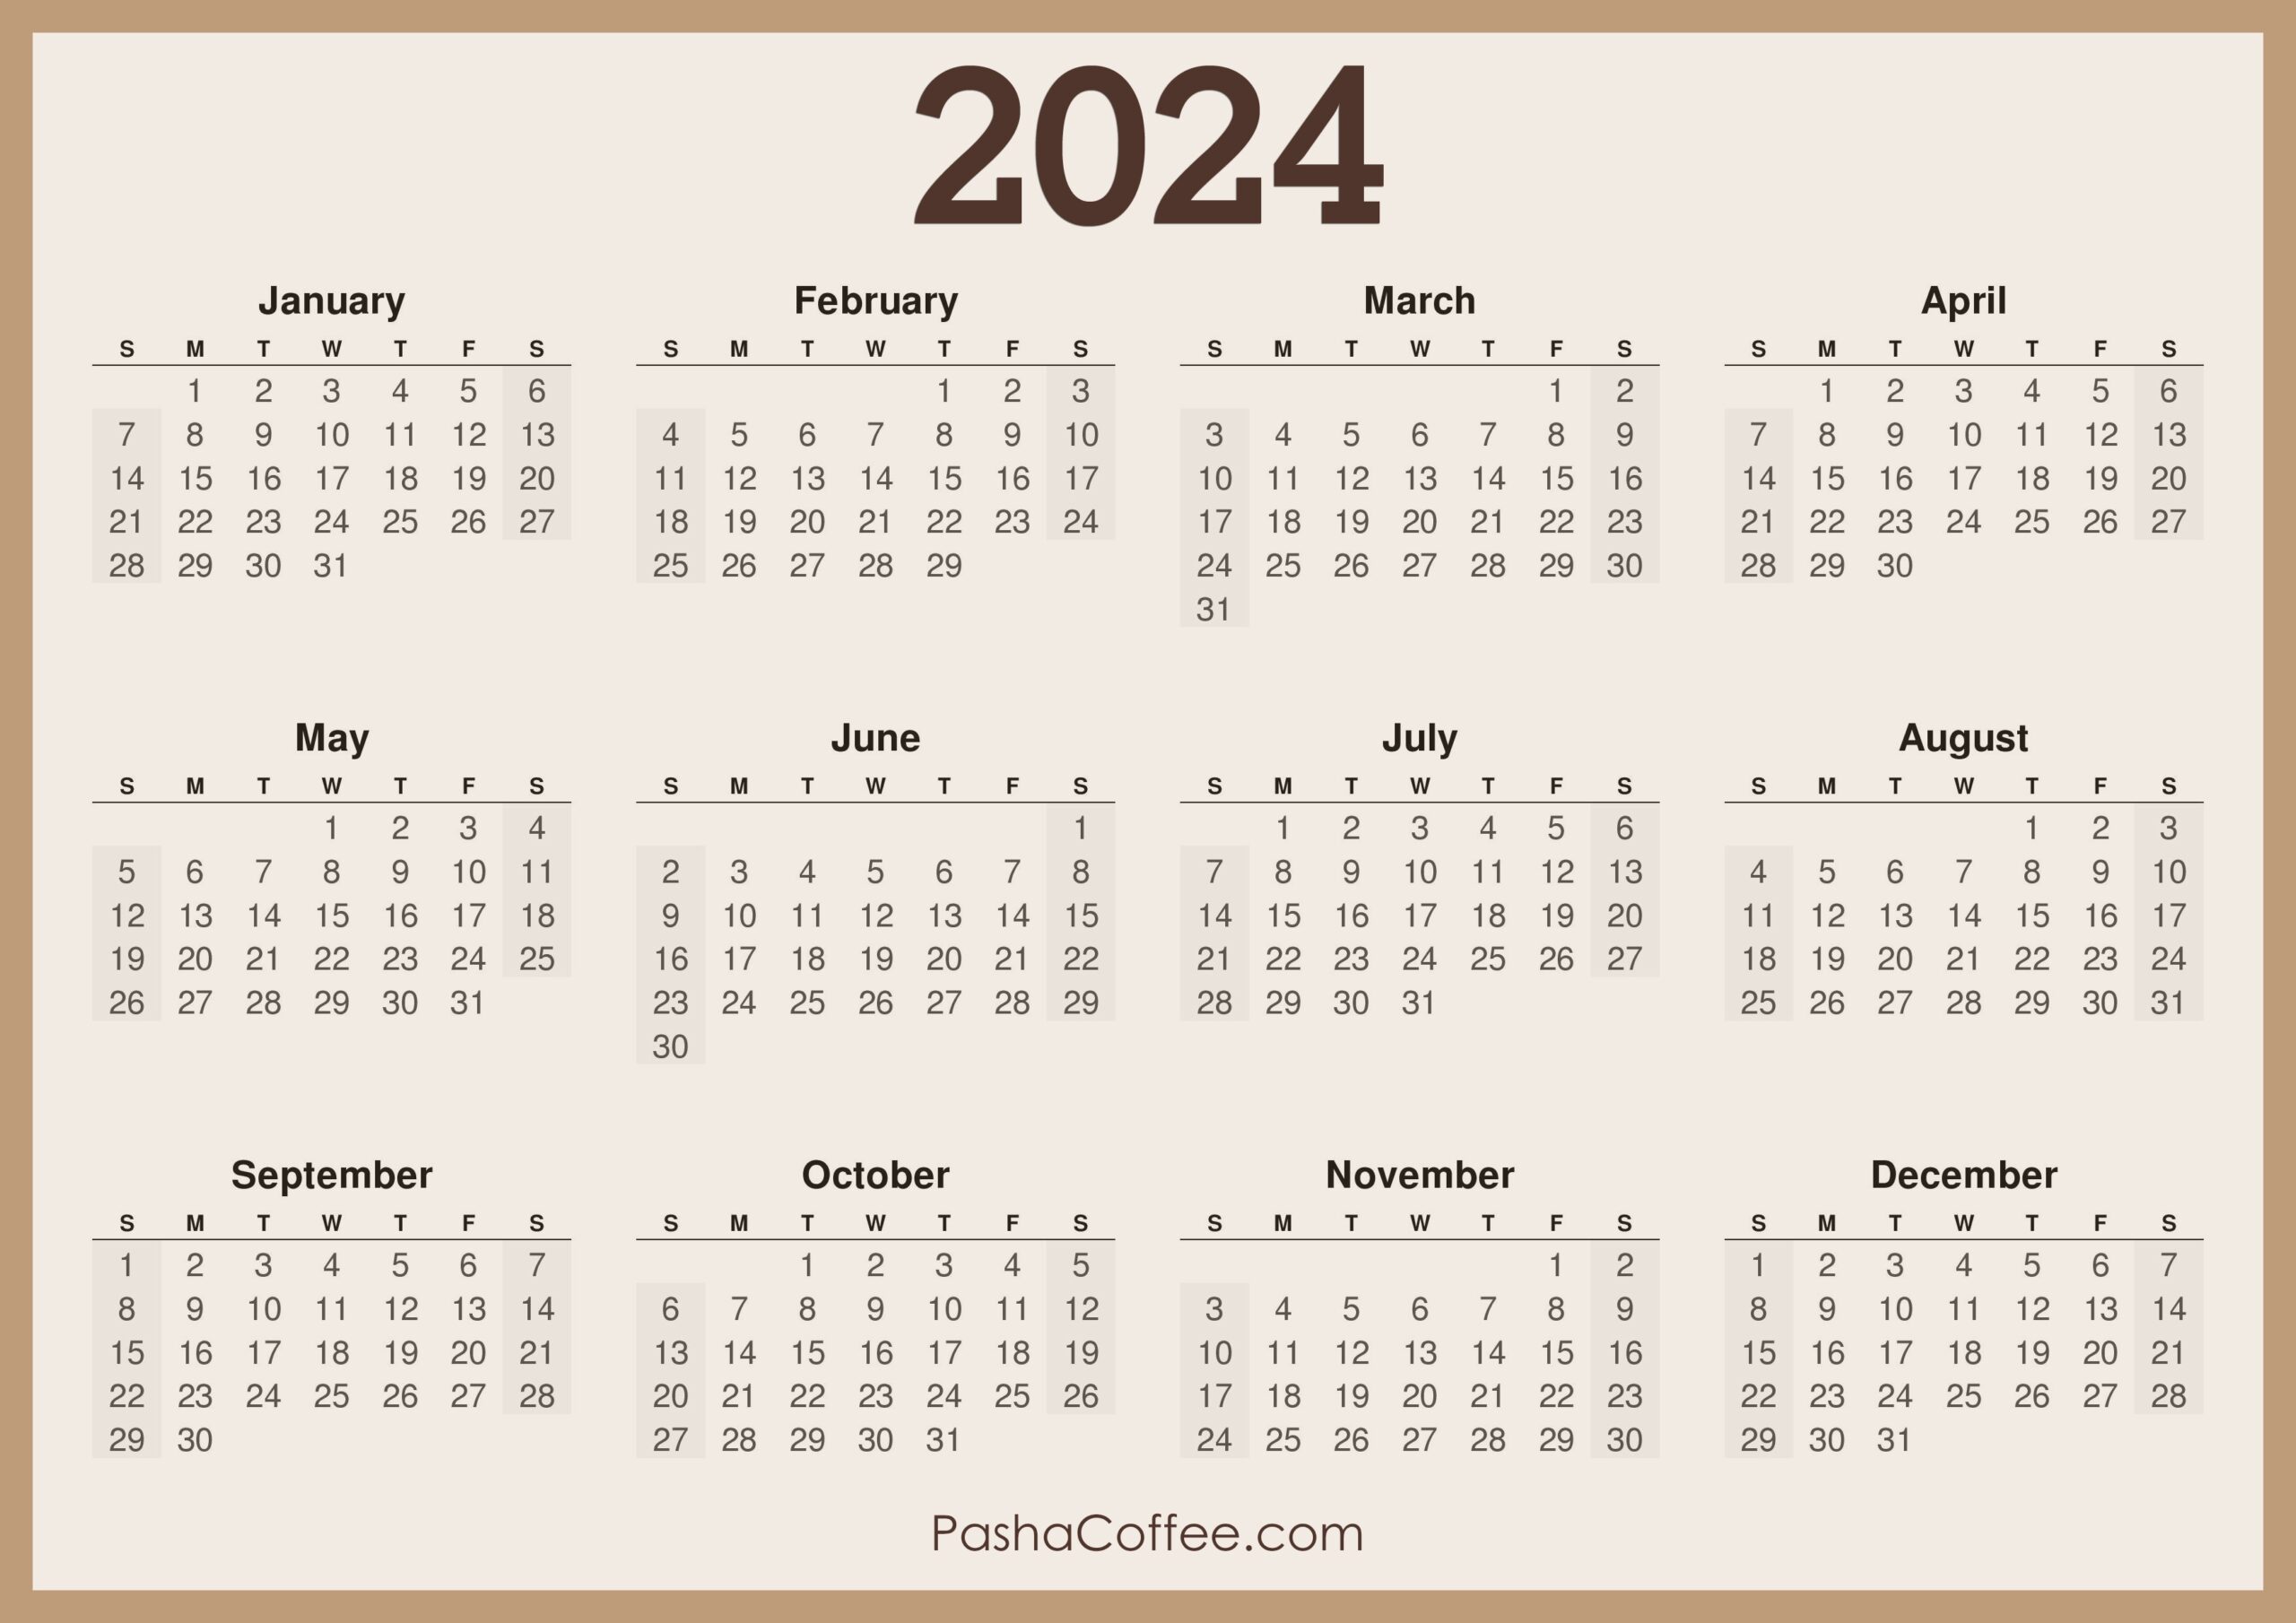 2024 Calendar Printable Free, Horizontal, Beige – Pashacoffee for Free Printable Calendar 2024 Without Downloading